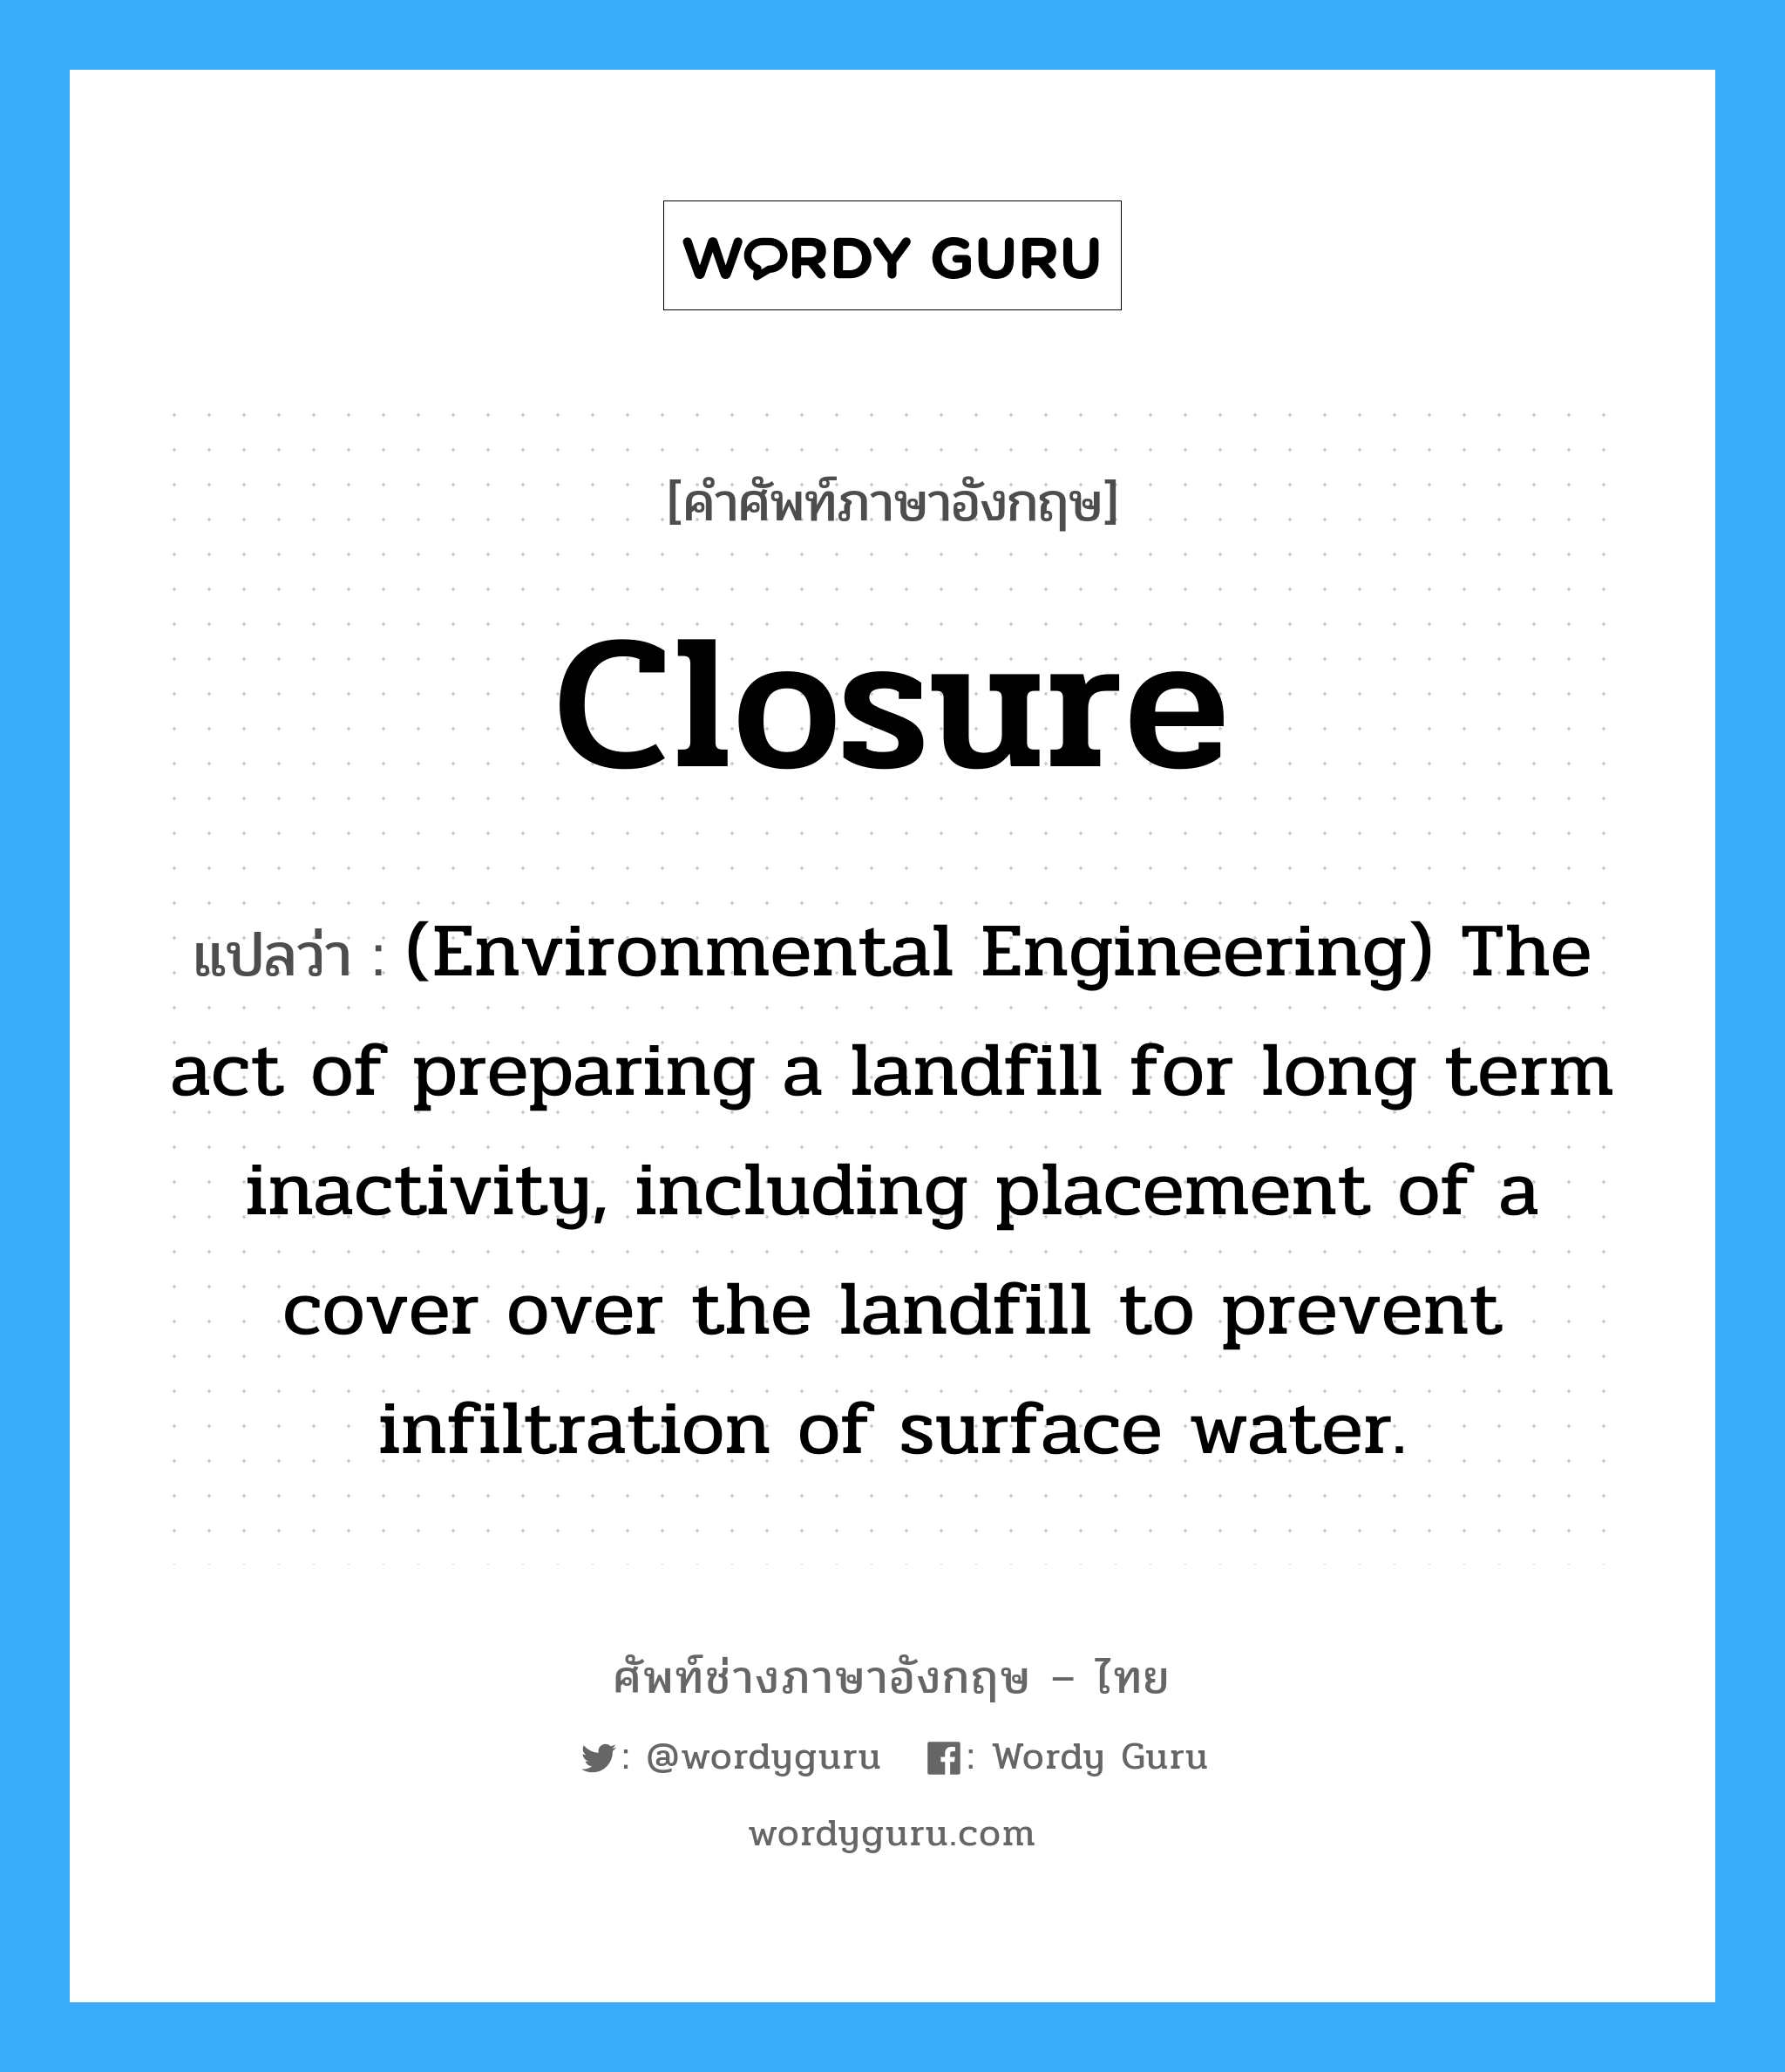 Closure แปลว่า?, คำศัพท์ช่างภาษาอังกฤษ - ไทย Closure คำศัพท์ภาษาอังกฤษ Closure แปลว่า (Environmental Engineering) The act of preparing a landfill for long term inactivity, including placement of a cover over the landfill to prevent infiltration of surface water.